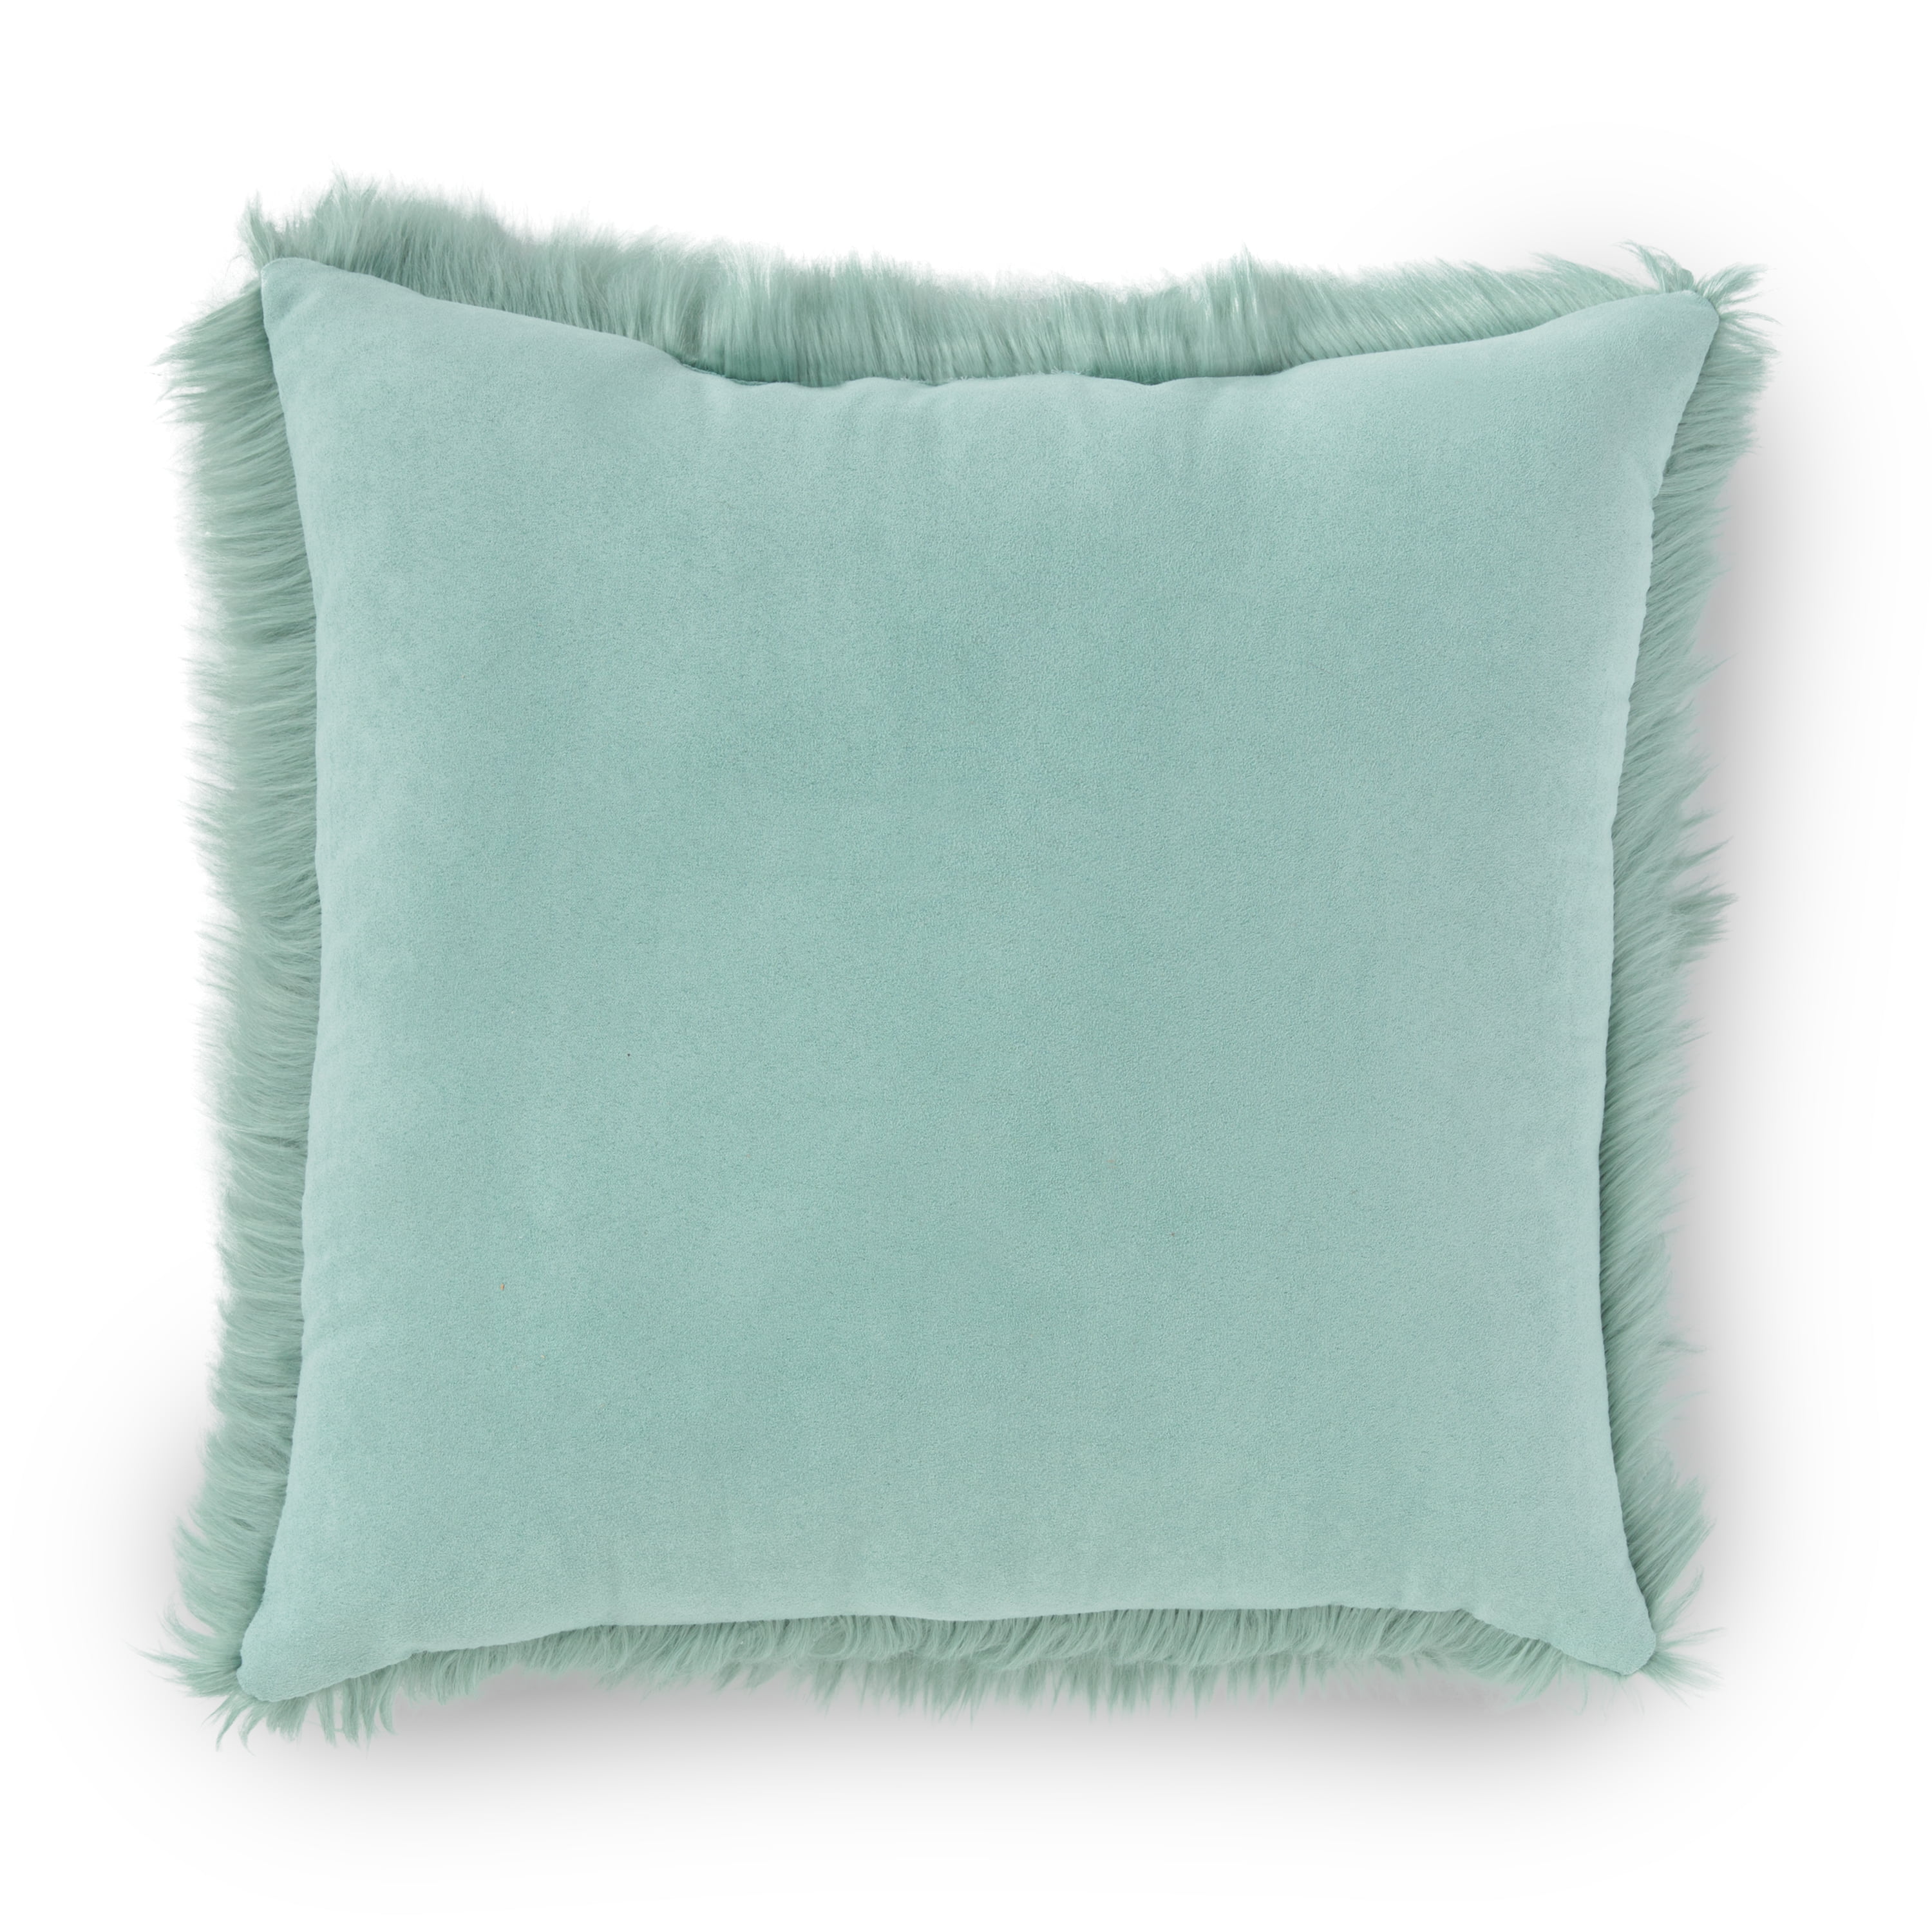 Sorra Home 18 in. x 18 in. x 6 in. Gardenia Seaglass Square Outdoor/Indoor Corded Throw Pillow (Set of 2), Blue